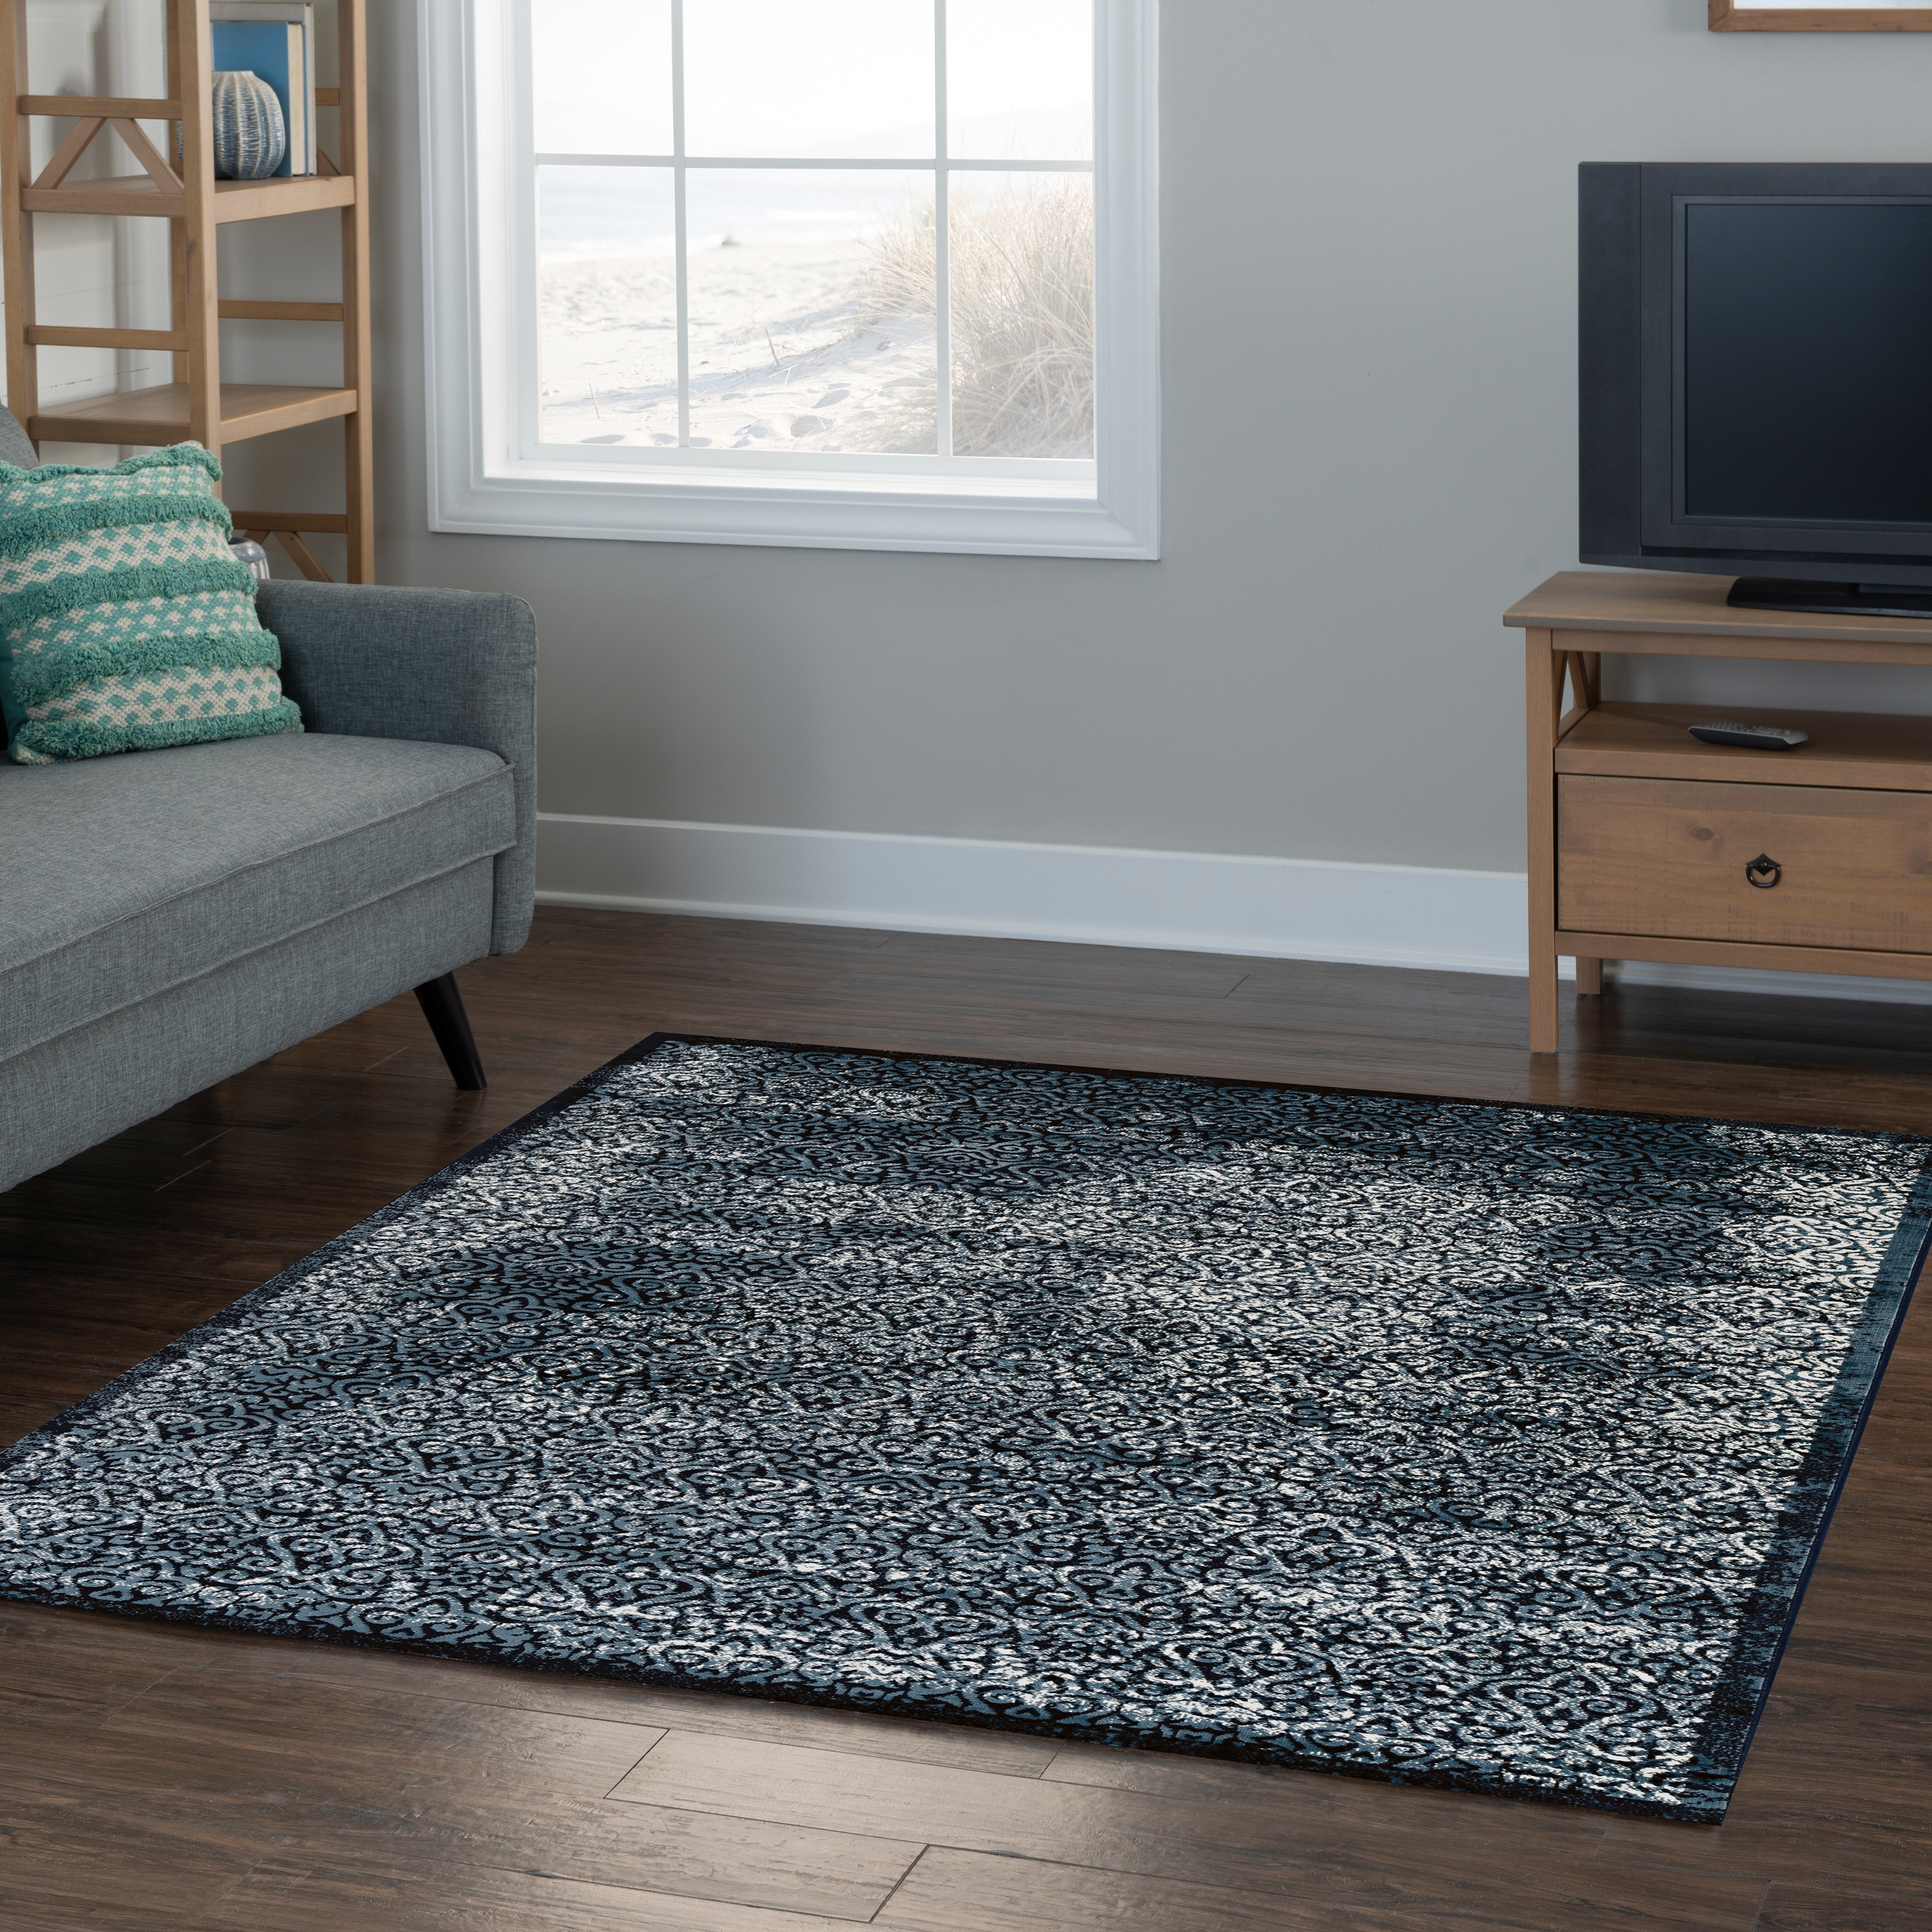 Linon Vintage Collection Illusion Blue Synthetic Rugs 9' x 12' 